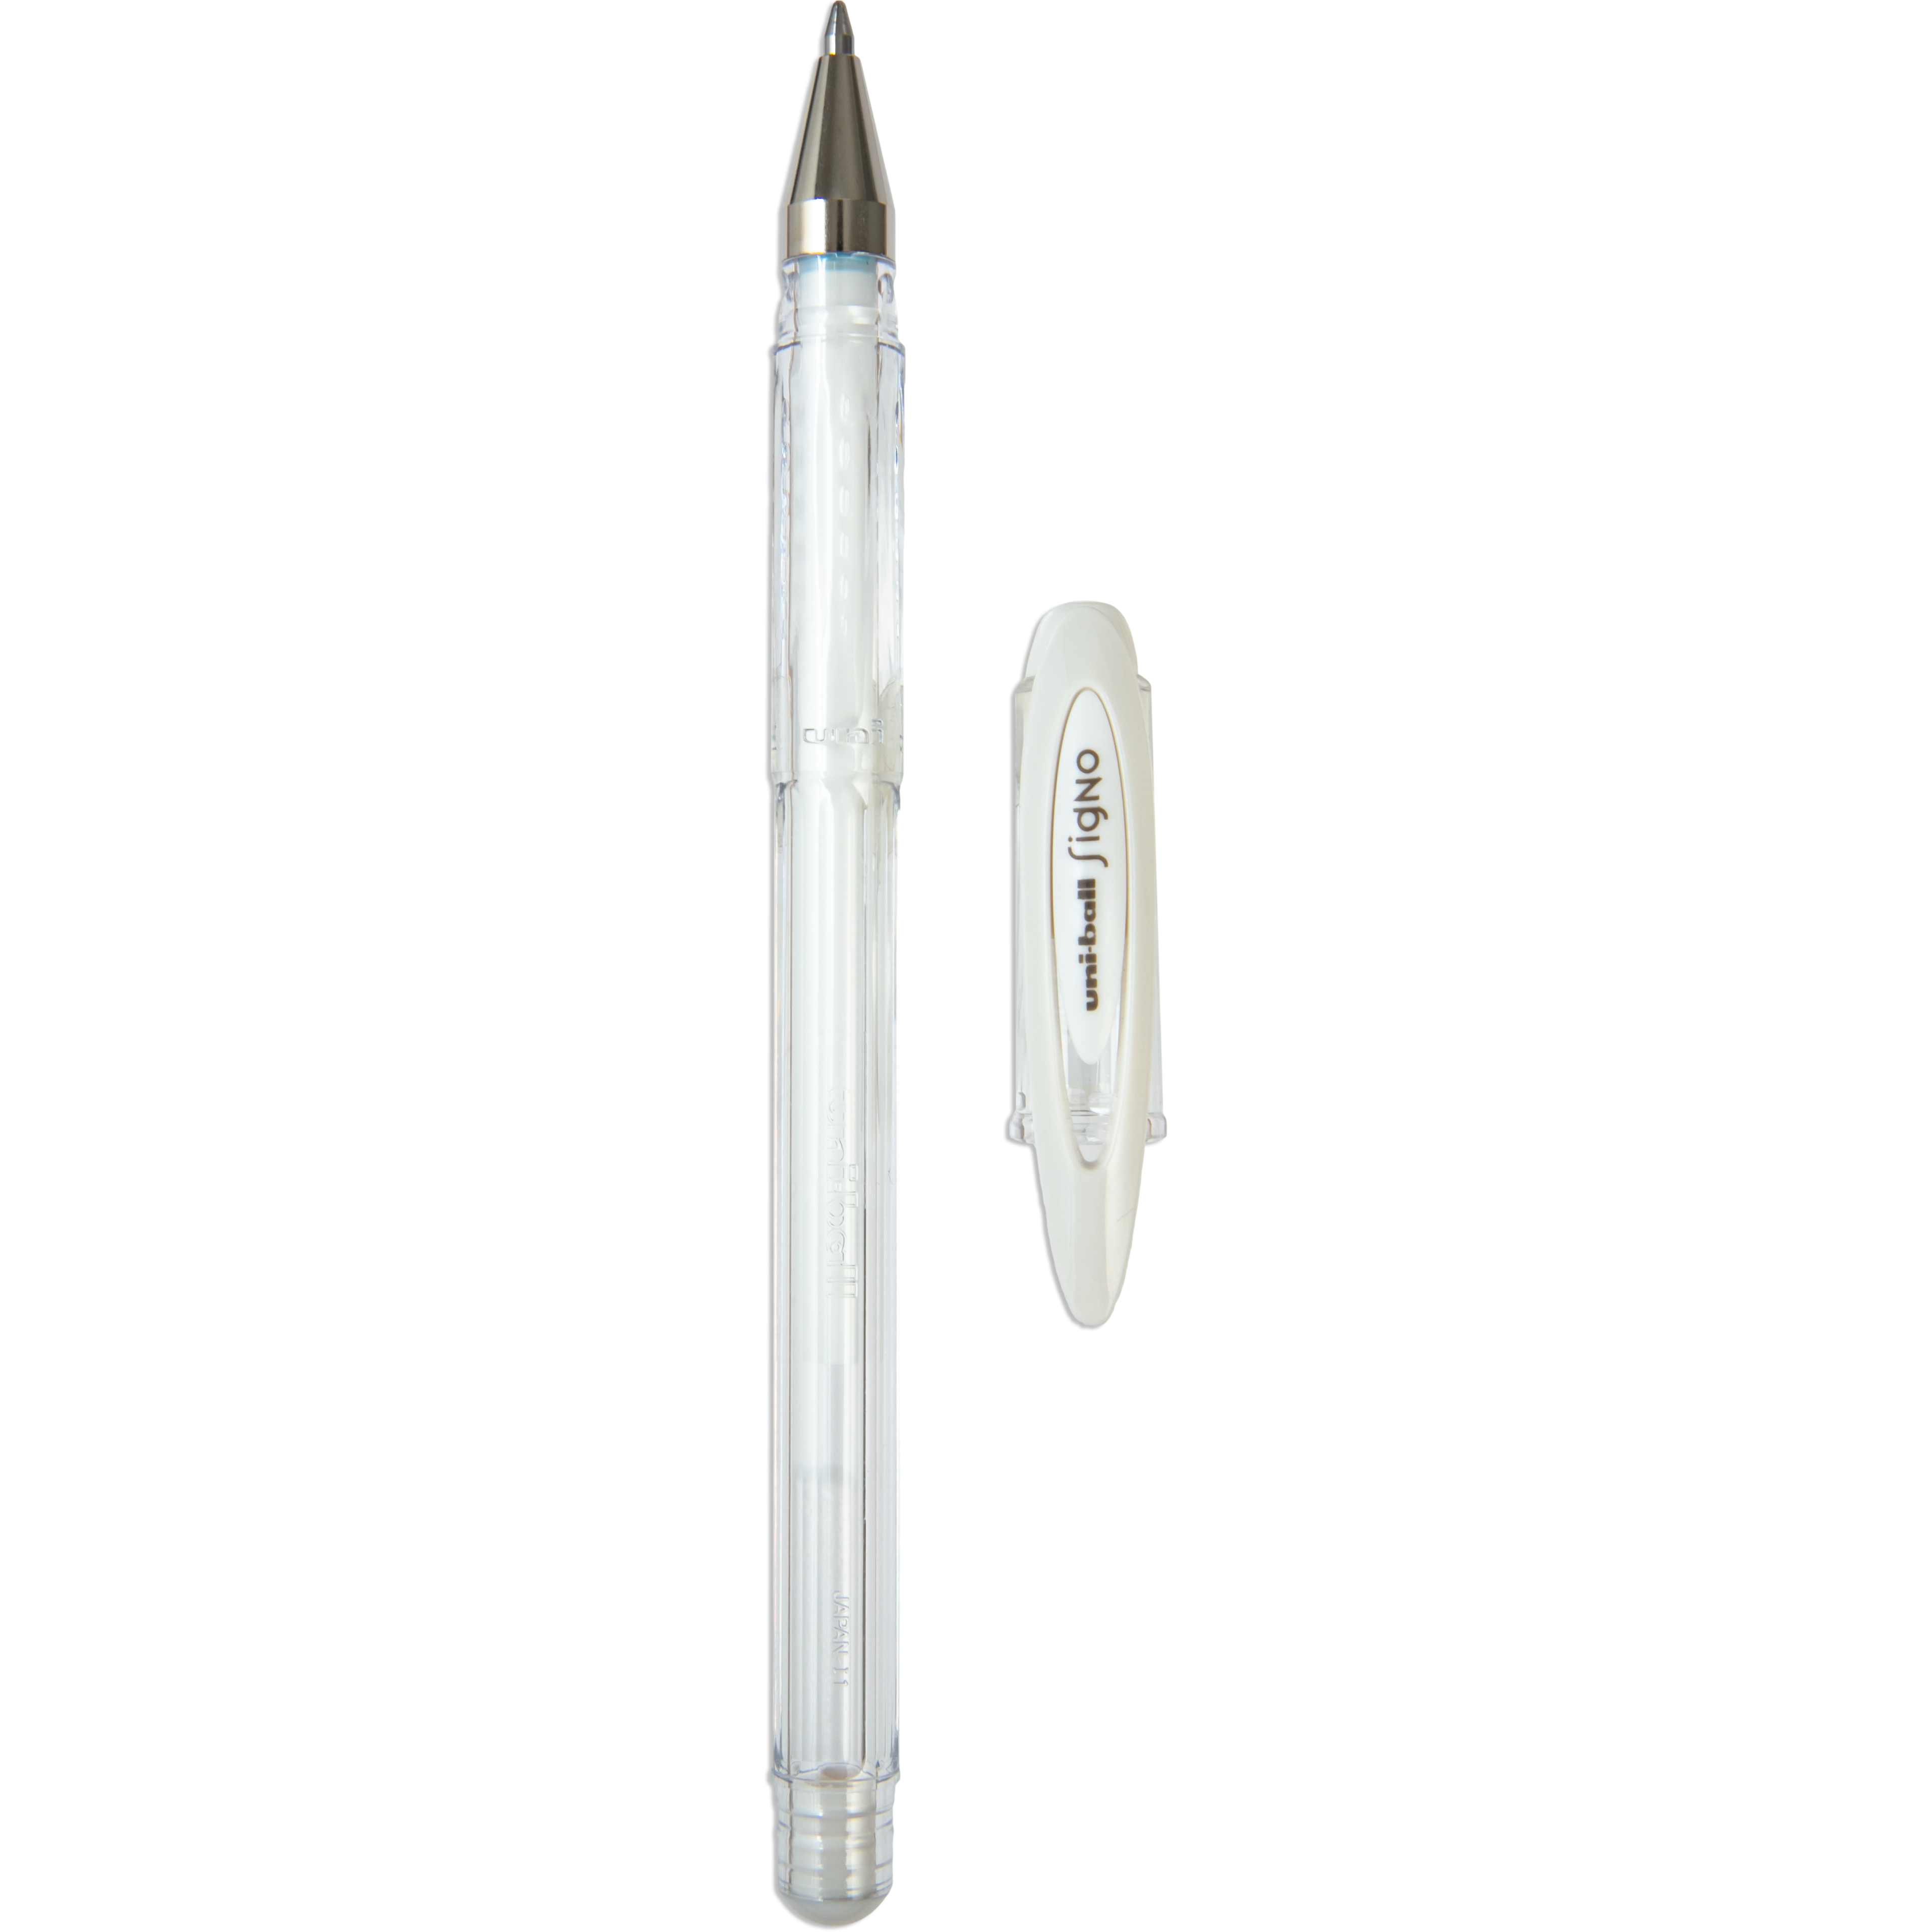 Change your life: Uniball Signo Gel Rollerball Pen White 0.7mm 967